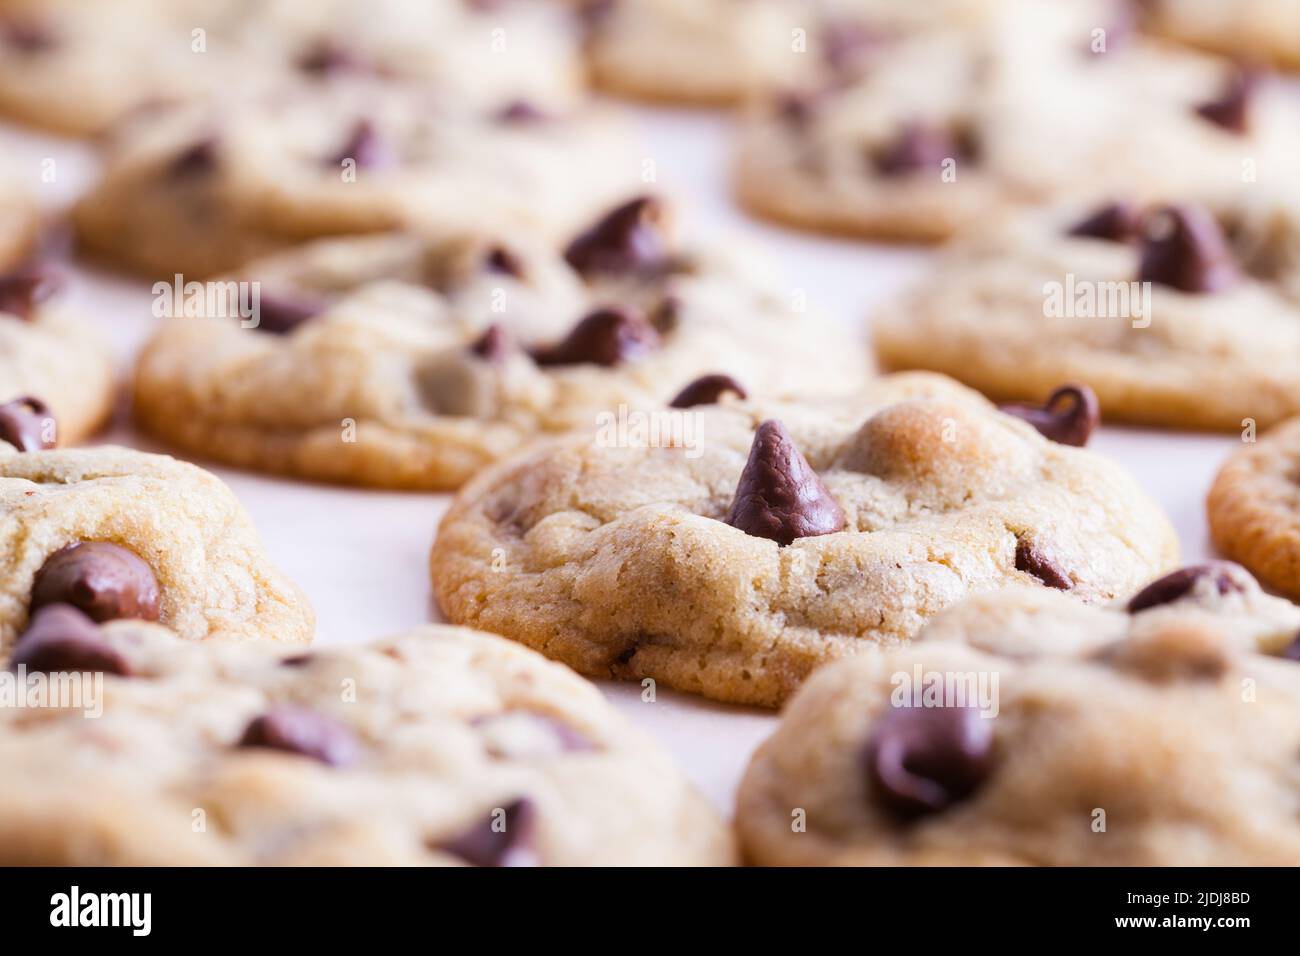 Several Chocolate Chip Cookies Background Close Up. Stock Photo